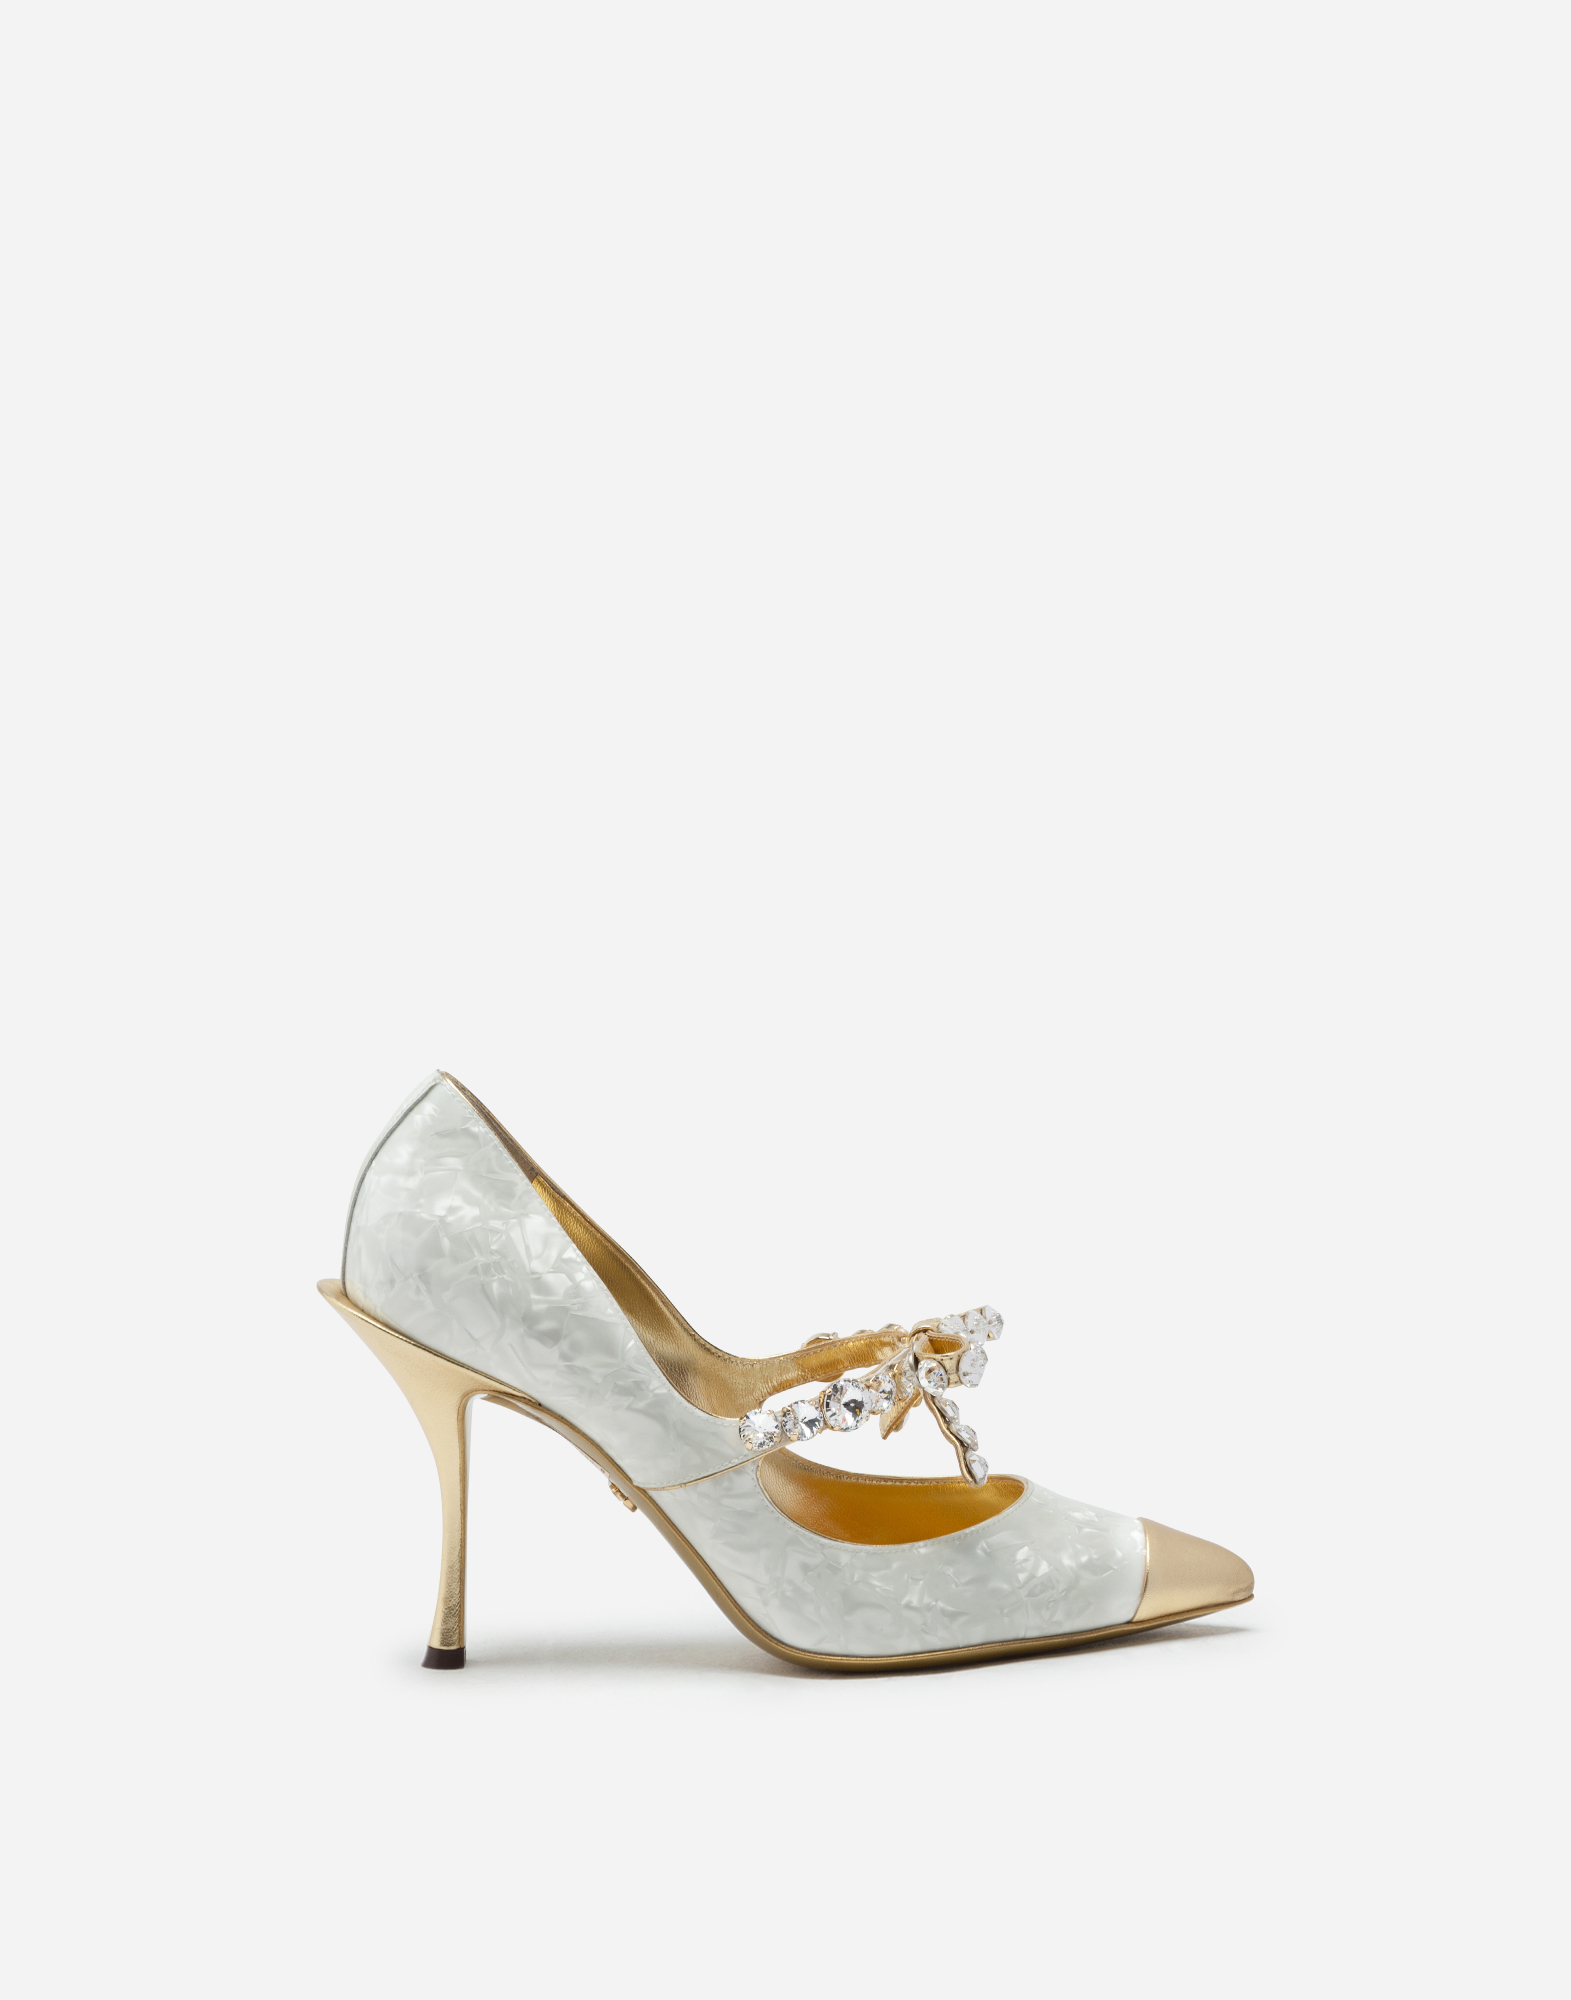 Women's Pumps | Dolce&Gabbana - MOTHER-OF-PEARL PRINT PATENT LEATHER PUMPS